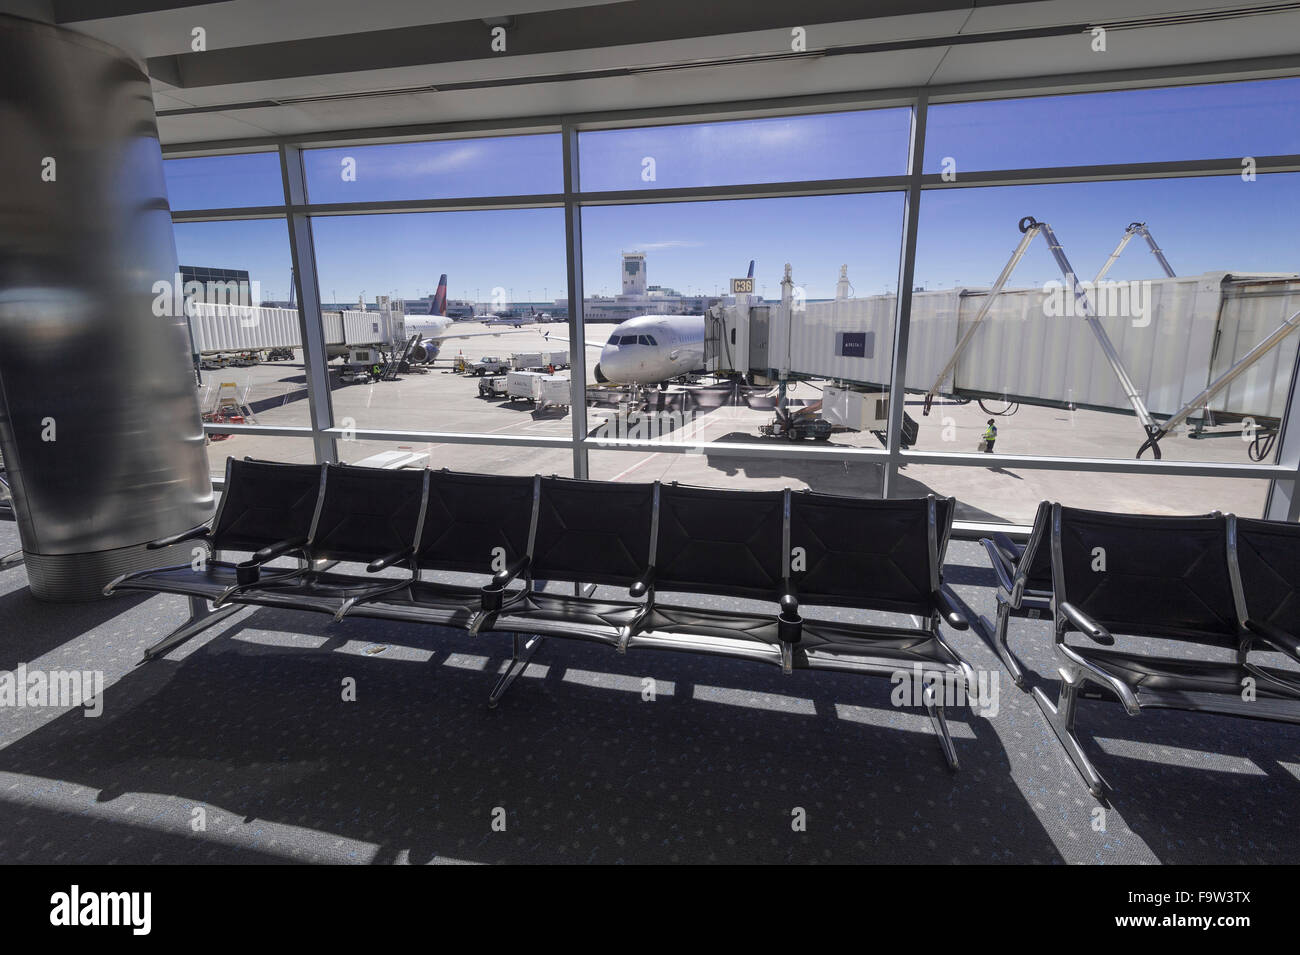 Empty Seats At Airport Gate Waiting Area With Window View Of Planes, Denver Colorado, USA Stock Photo